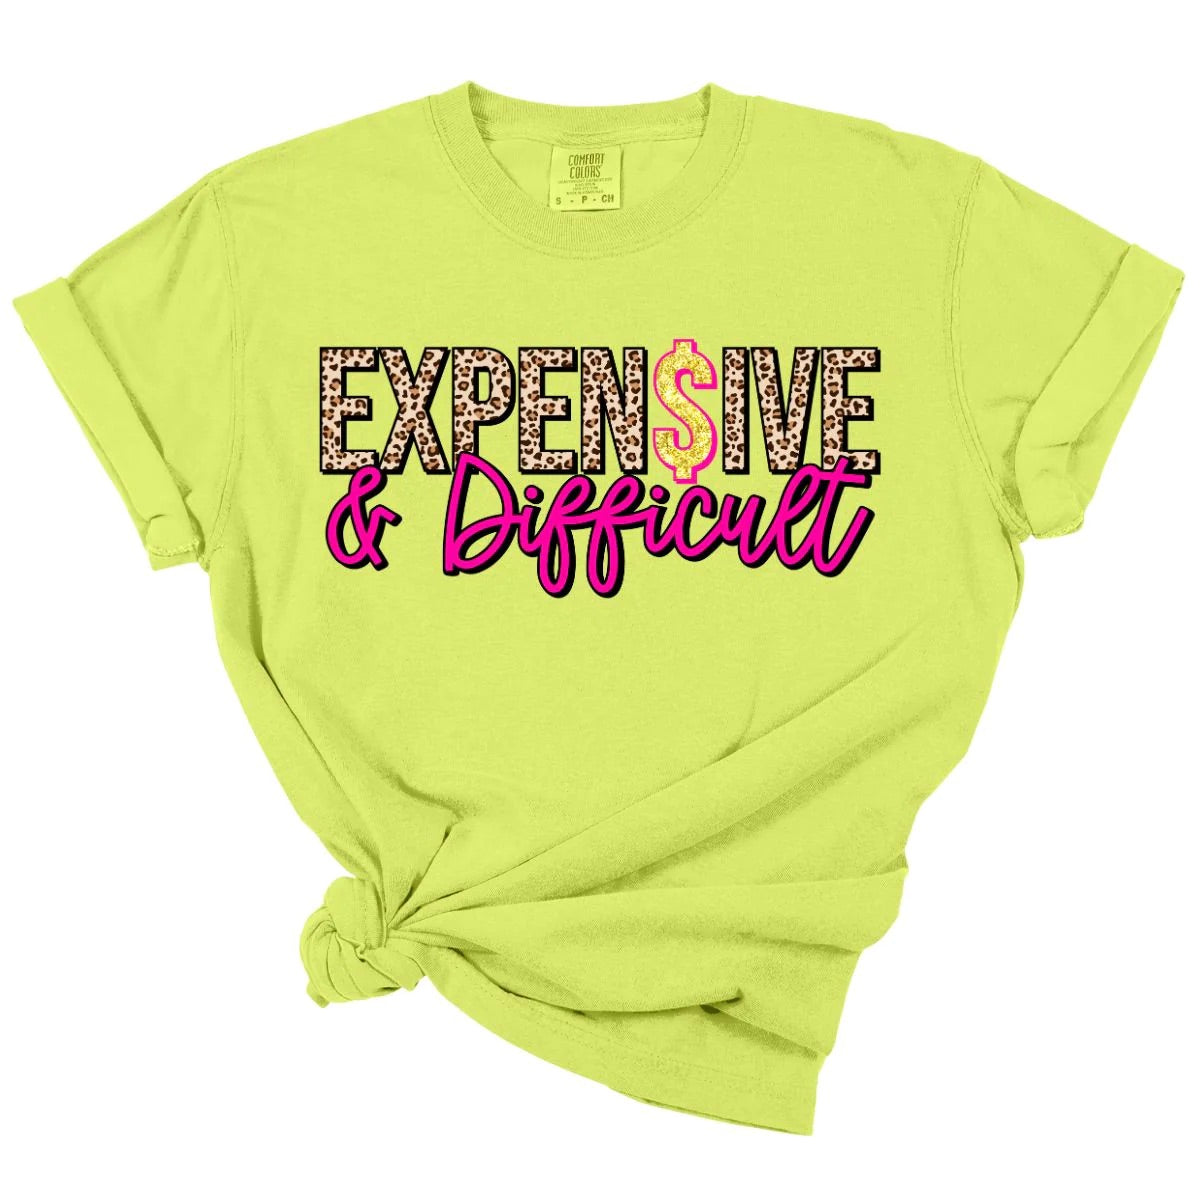 Expensive & Difficult Tee *MADE TO ORDER*